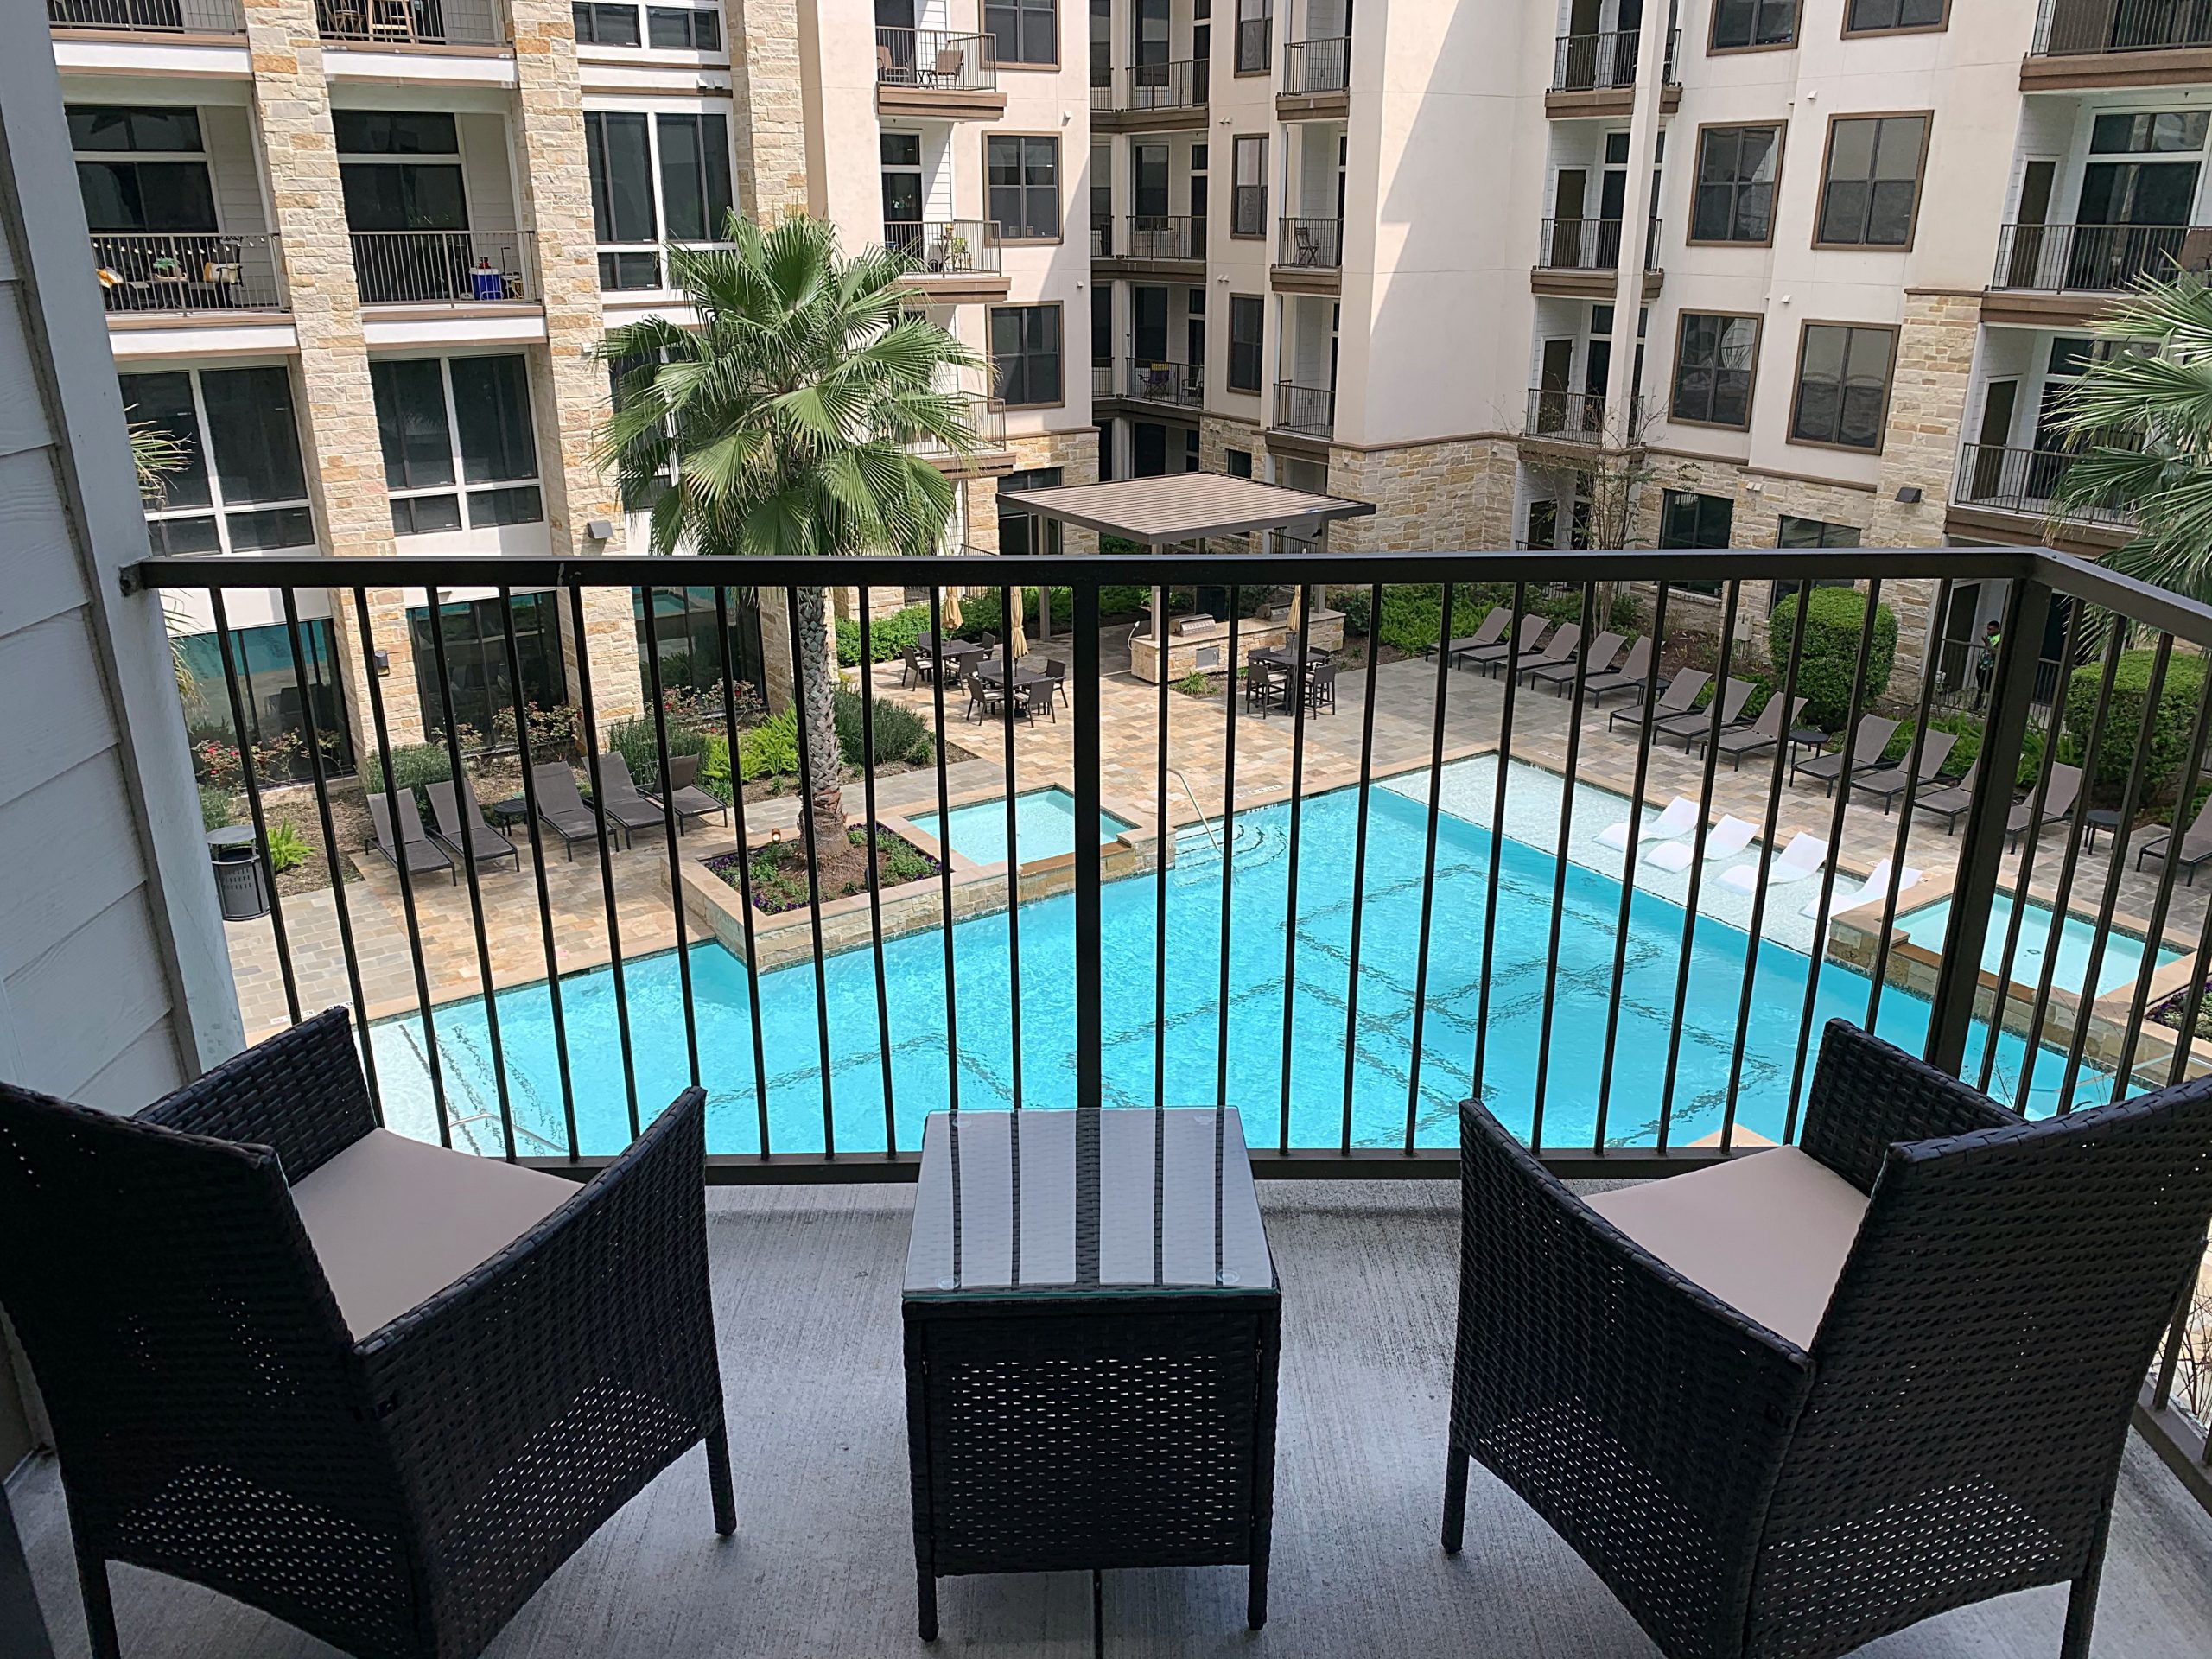 Balcony view from the California design at Premier Patient Housing.